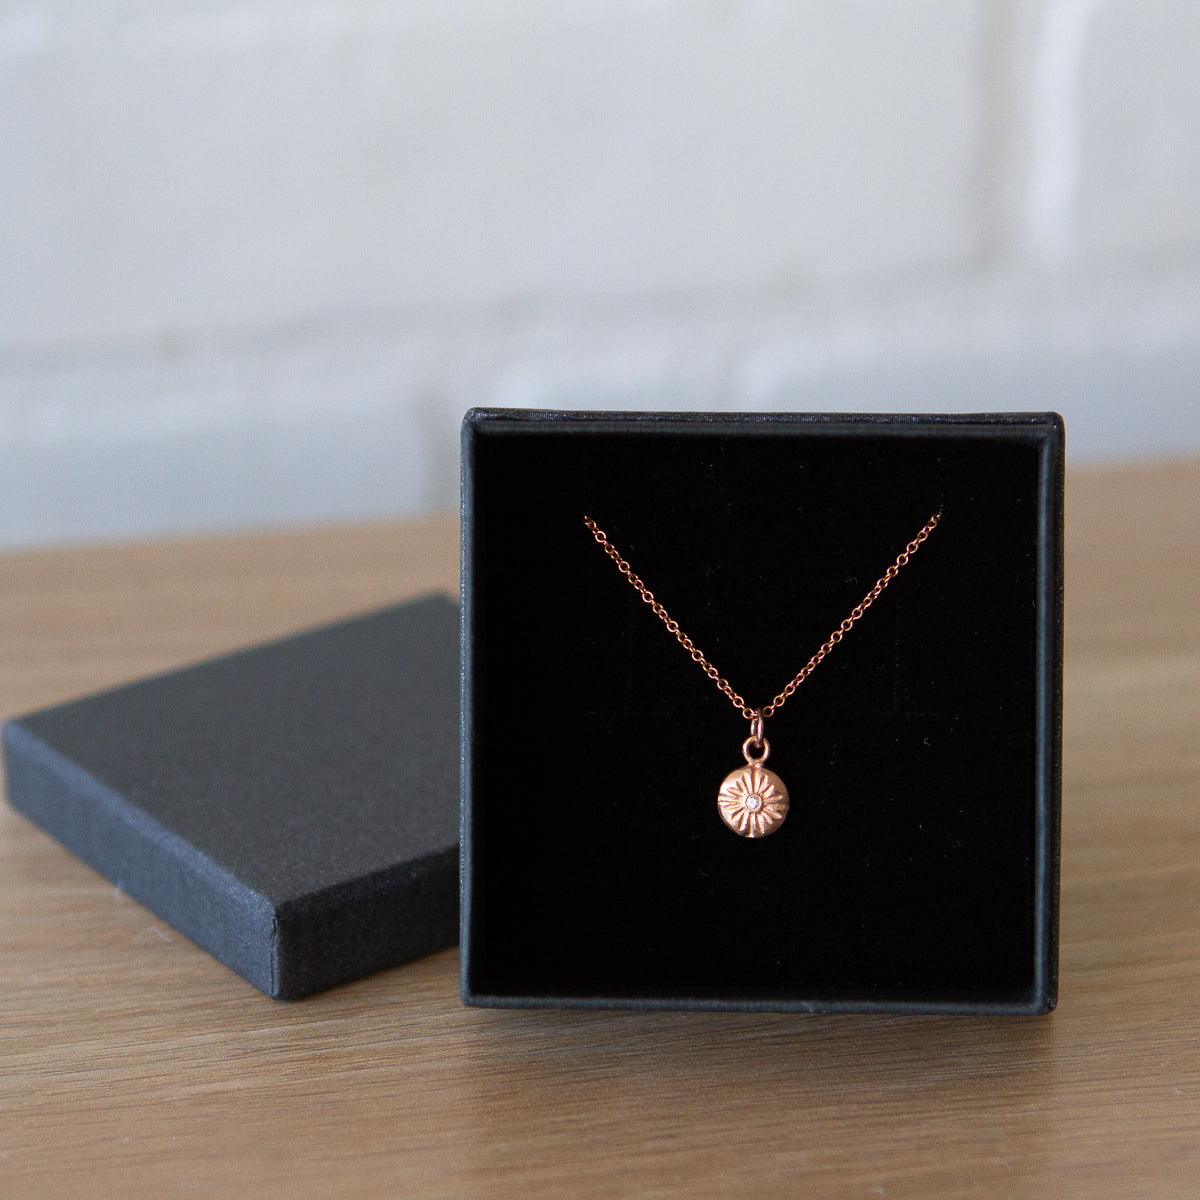 Rose Gold Sunburst Lucia Necklace with Diamond by Corey Egan in a gift box